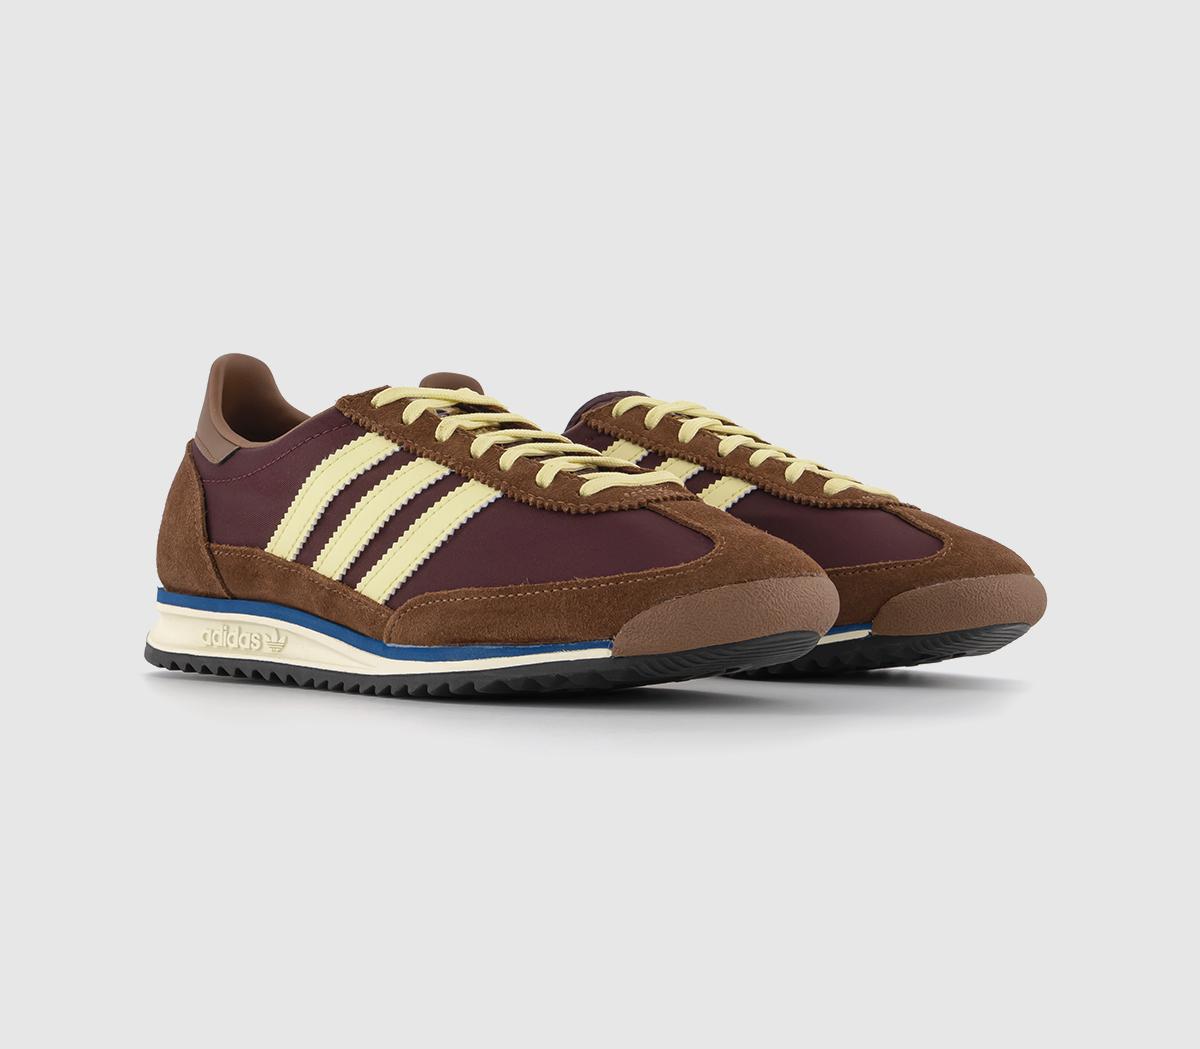 Adidas Womens SL 72 Trainers Maroon Almost Yellow Preloved Brown, 9.5